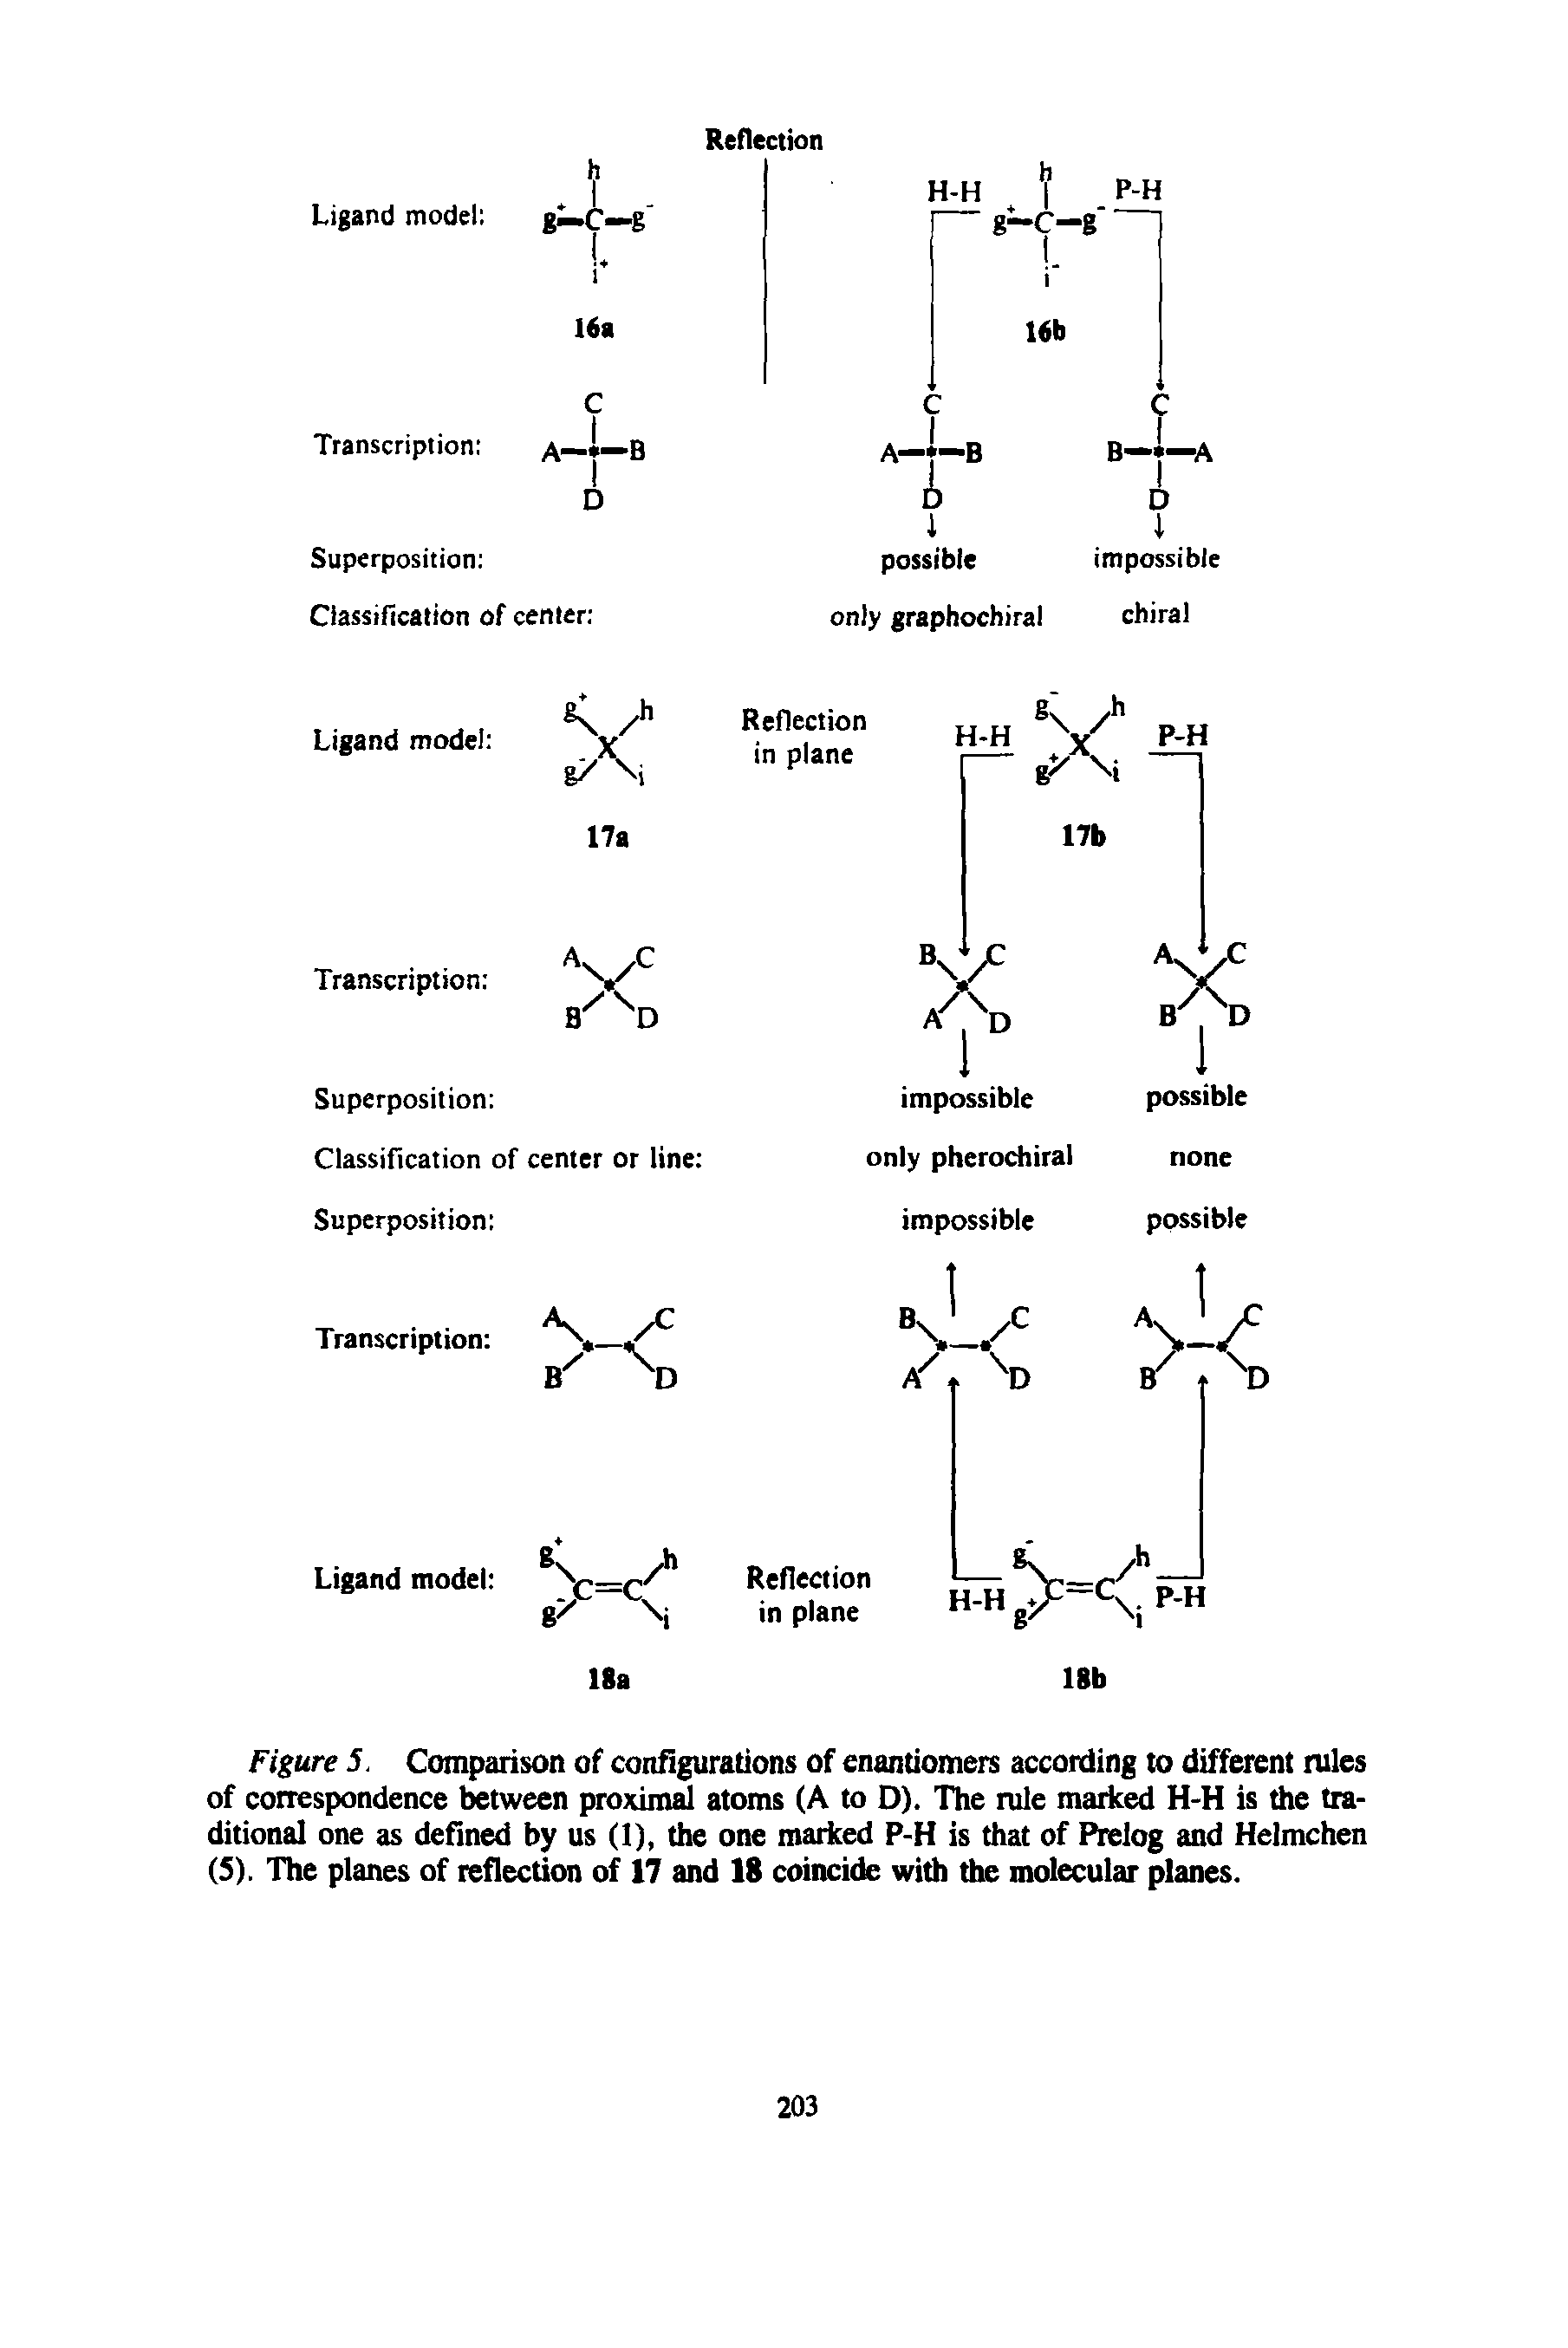 Figure S. Comparison of configurations of enantiomers according to different rules of correspondence between proximal atoms (A to D). The rule marked H-H is the traditional one as defined by us (1), the one marked P-H is that of Prelog and Helmchen (S). The planes of reflection of 17 and 18 coincide with the molecular planes.